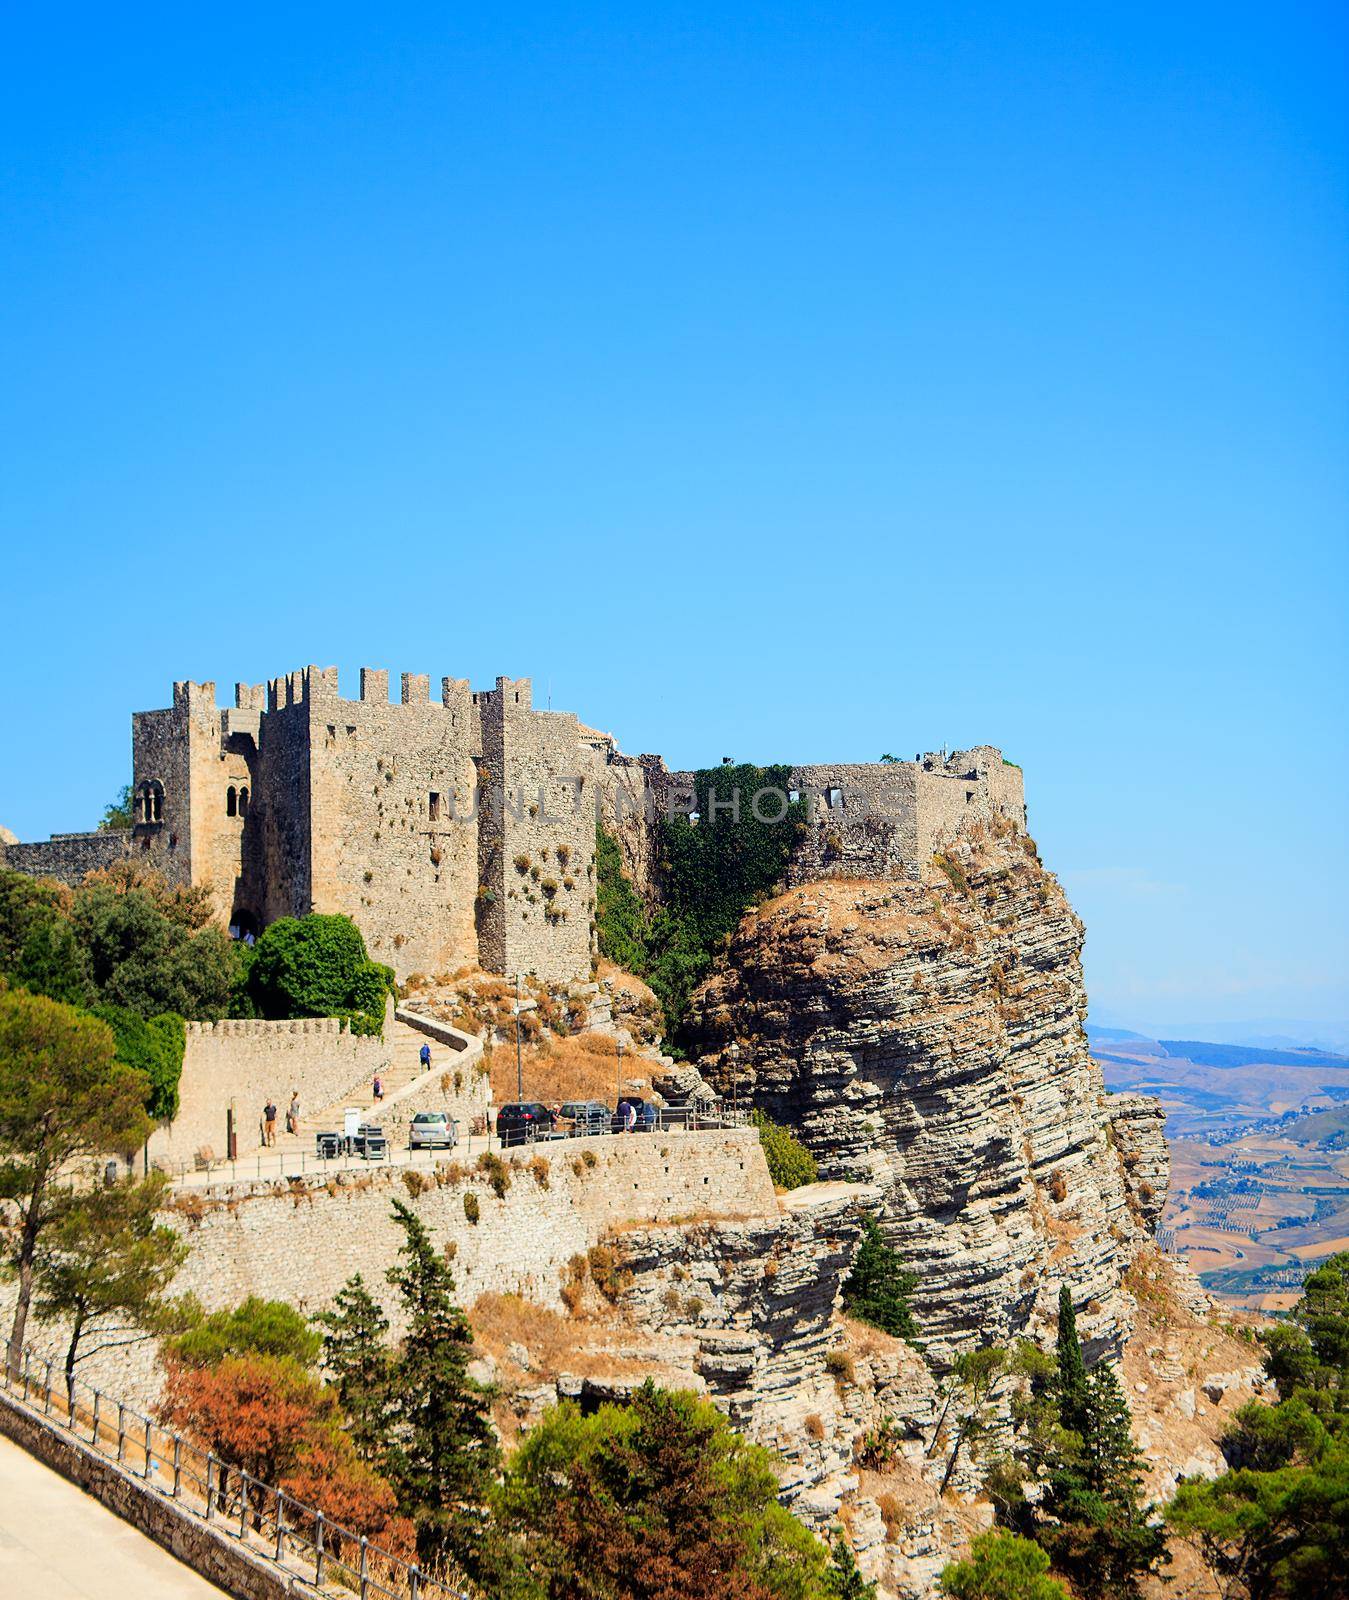 View of the Venere castle in Erice, Trapani